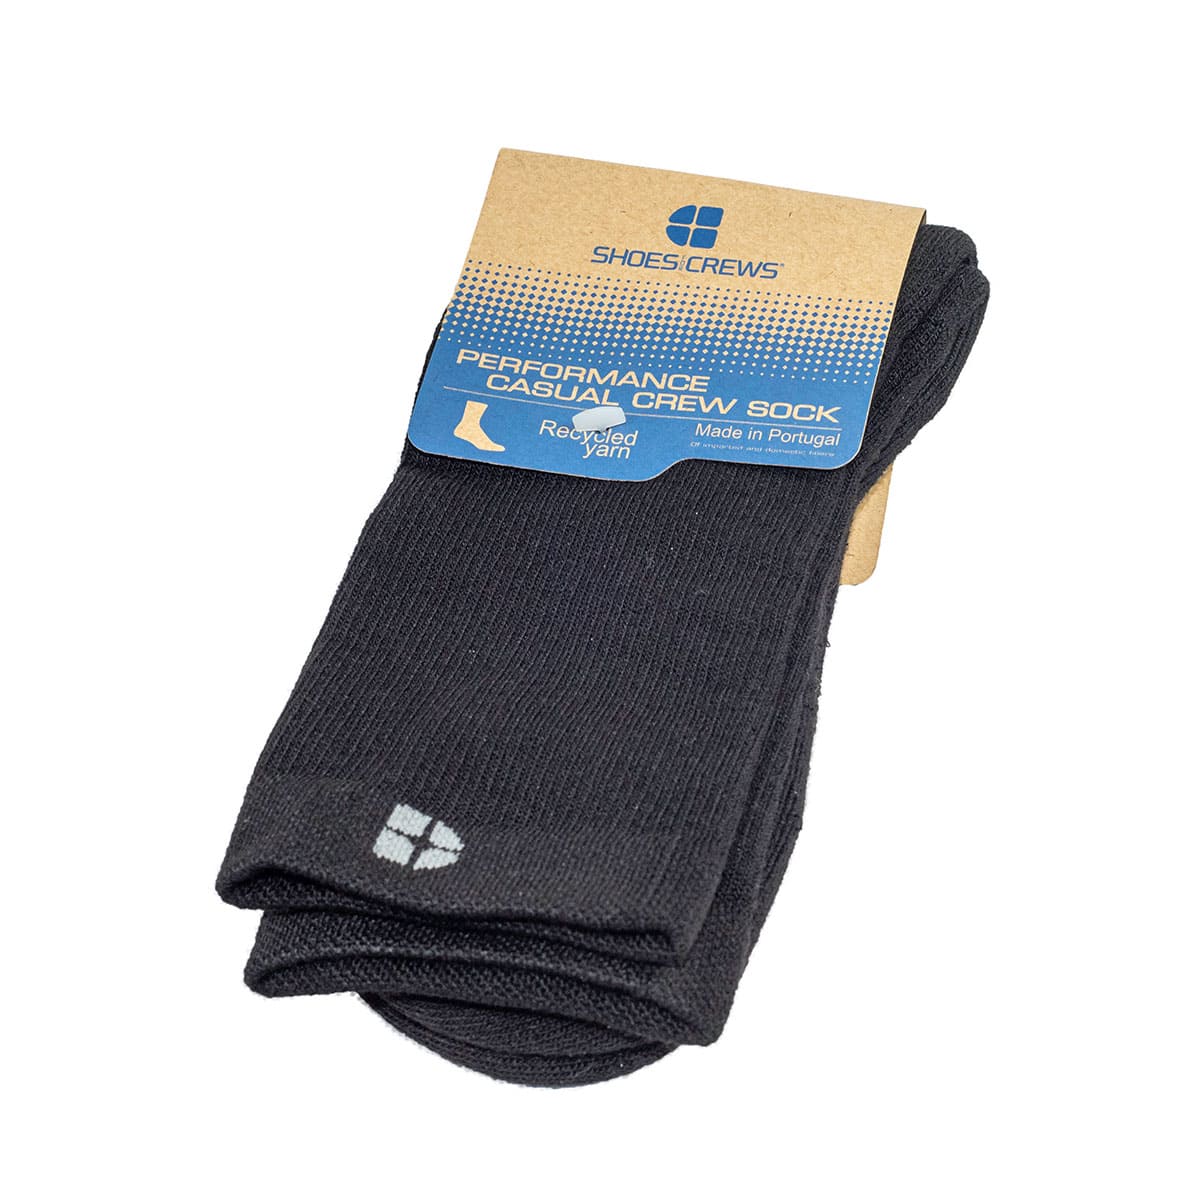 The crew sock recycled by Shoes For Crews, made from 100 per cent recycled polyester, offers extra comfort, photo of package.